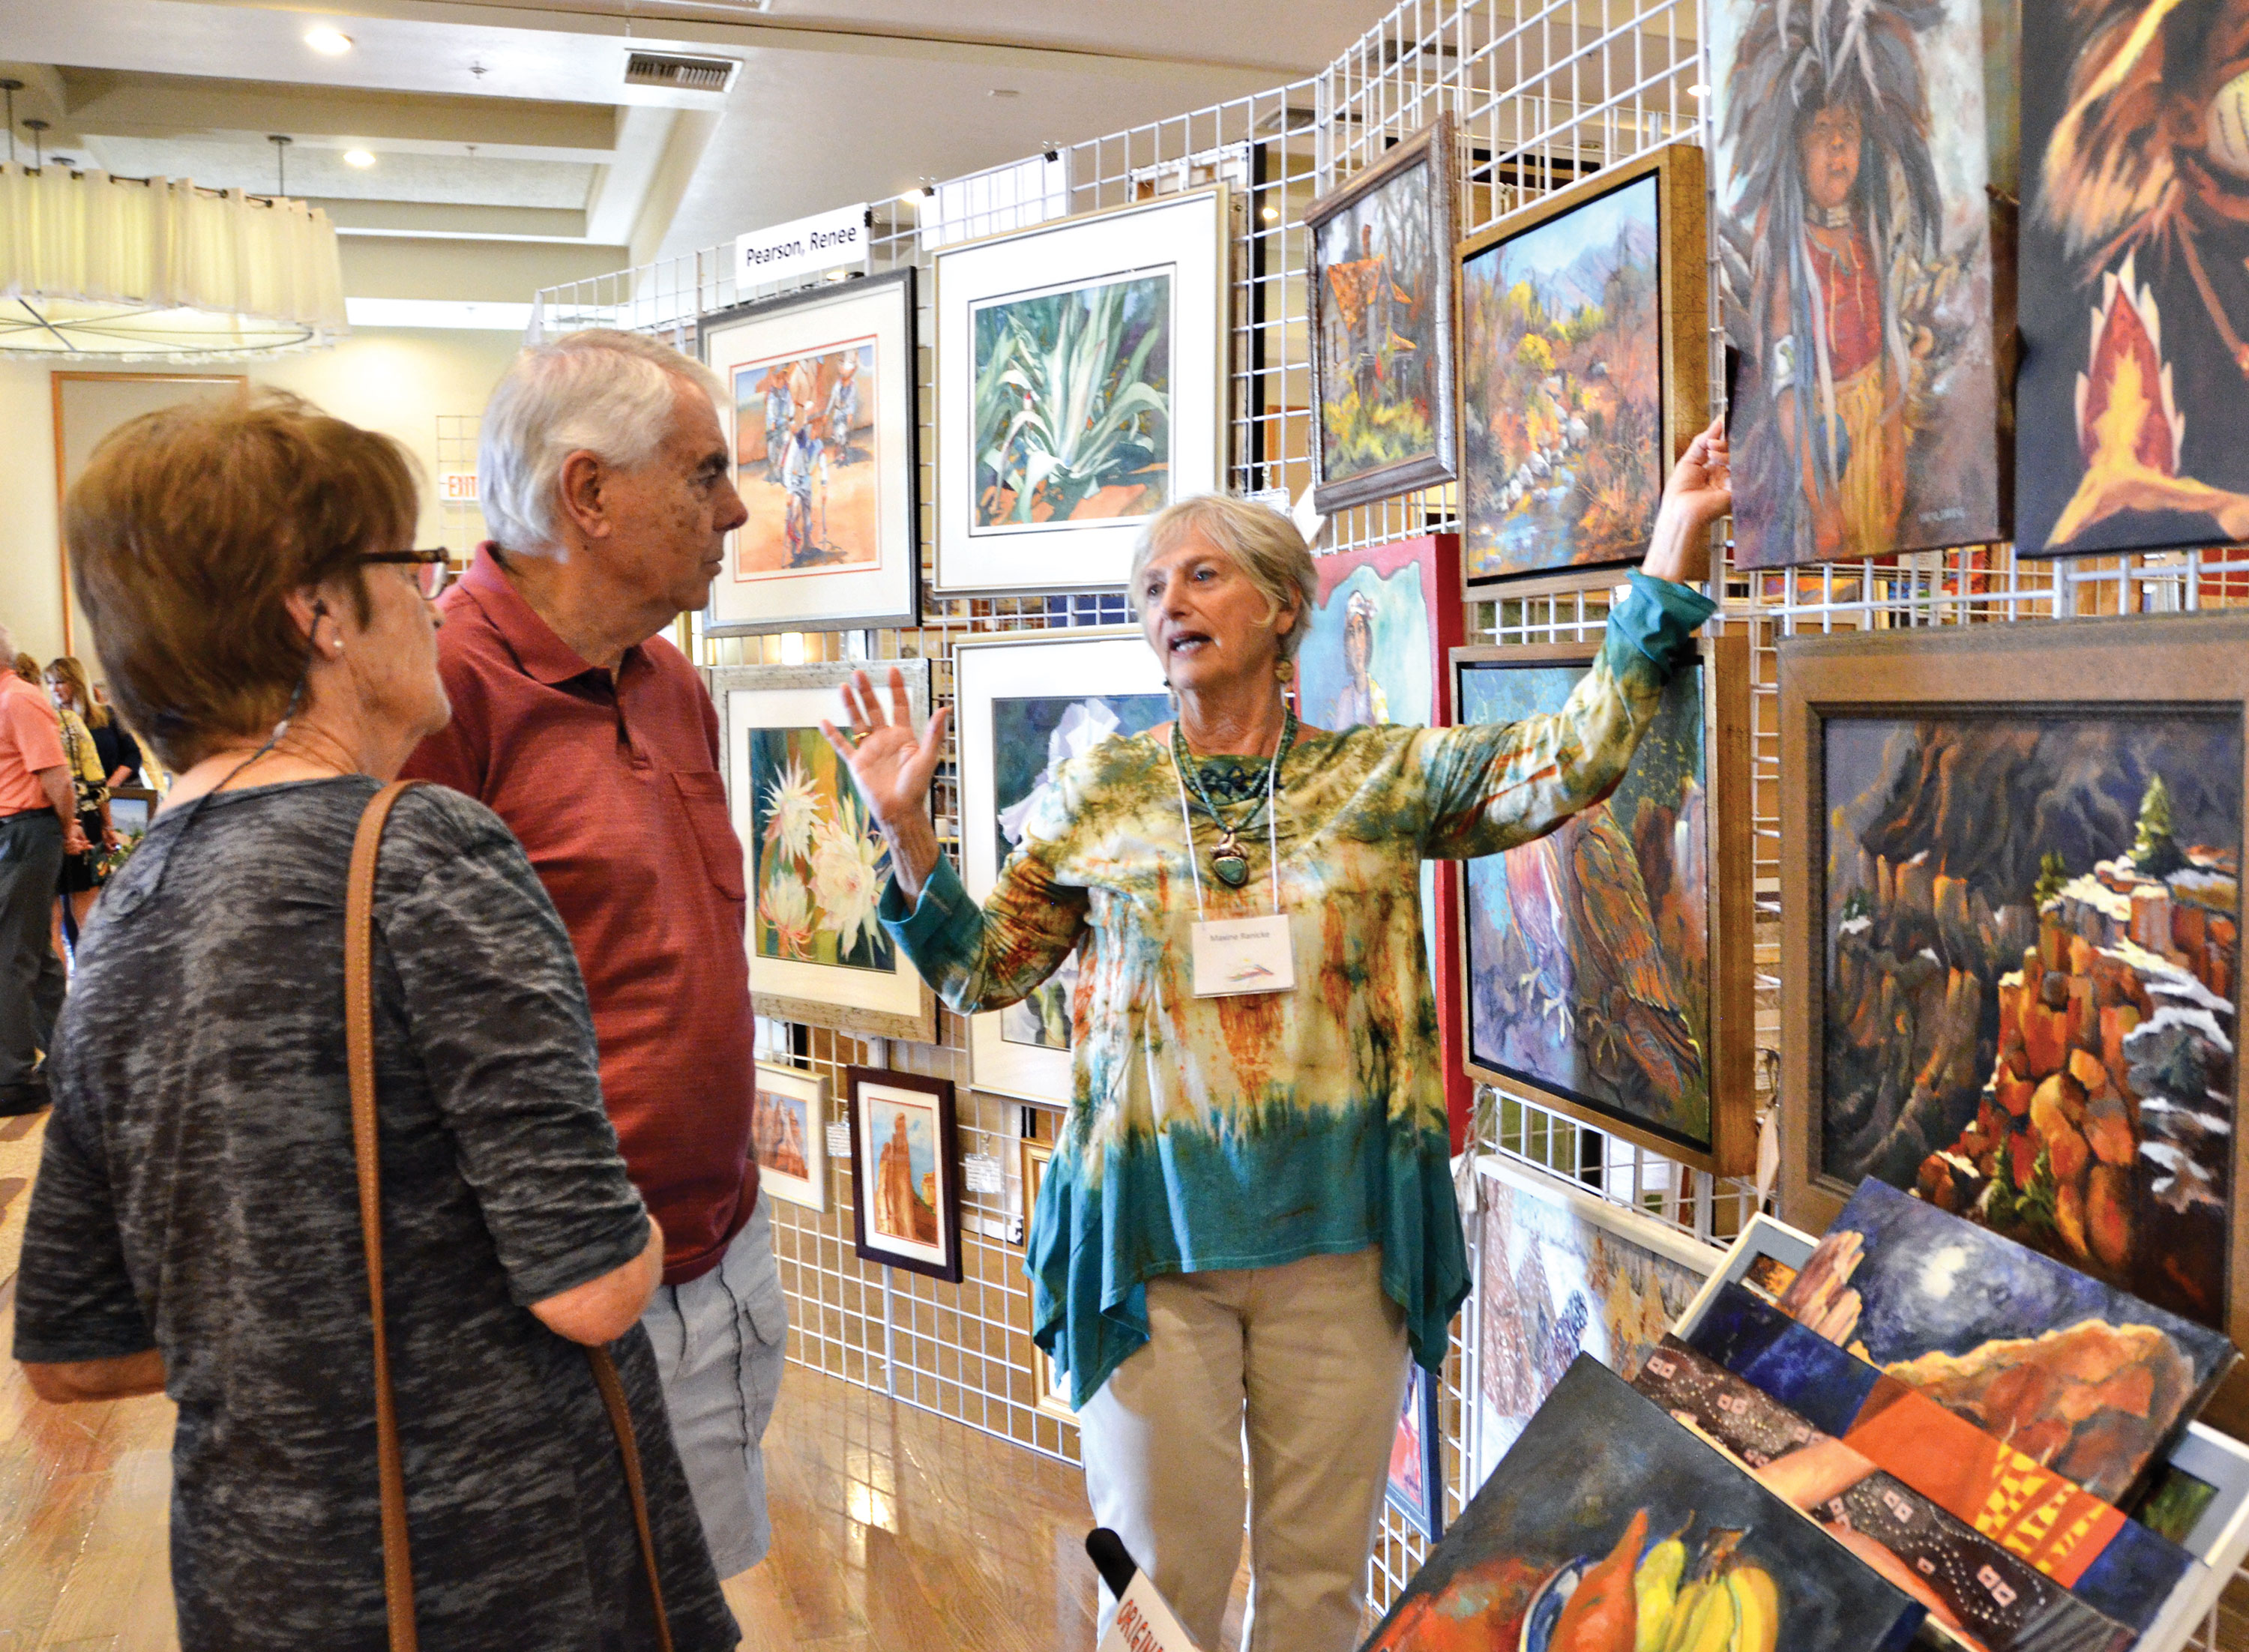 Artist Maxine Ranicke discusses her art with Chris and Margrit Wehrli.